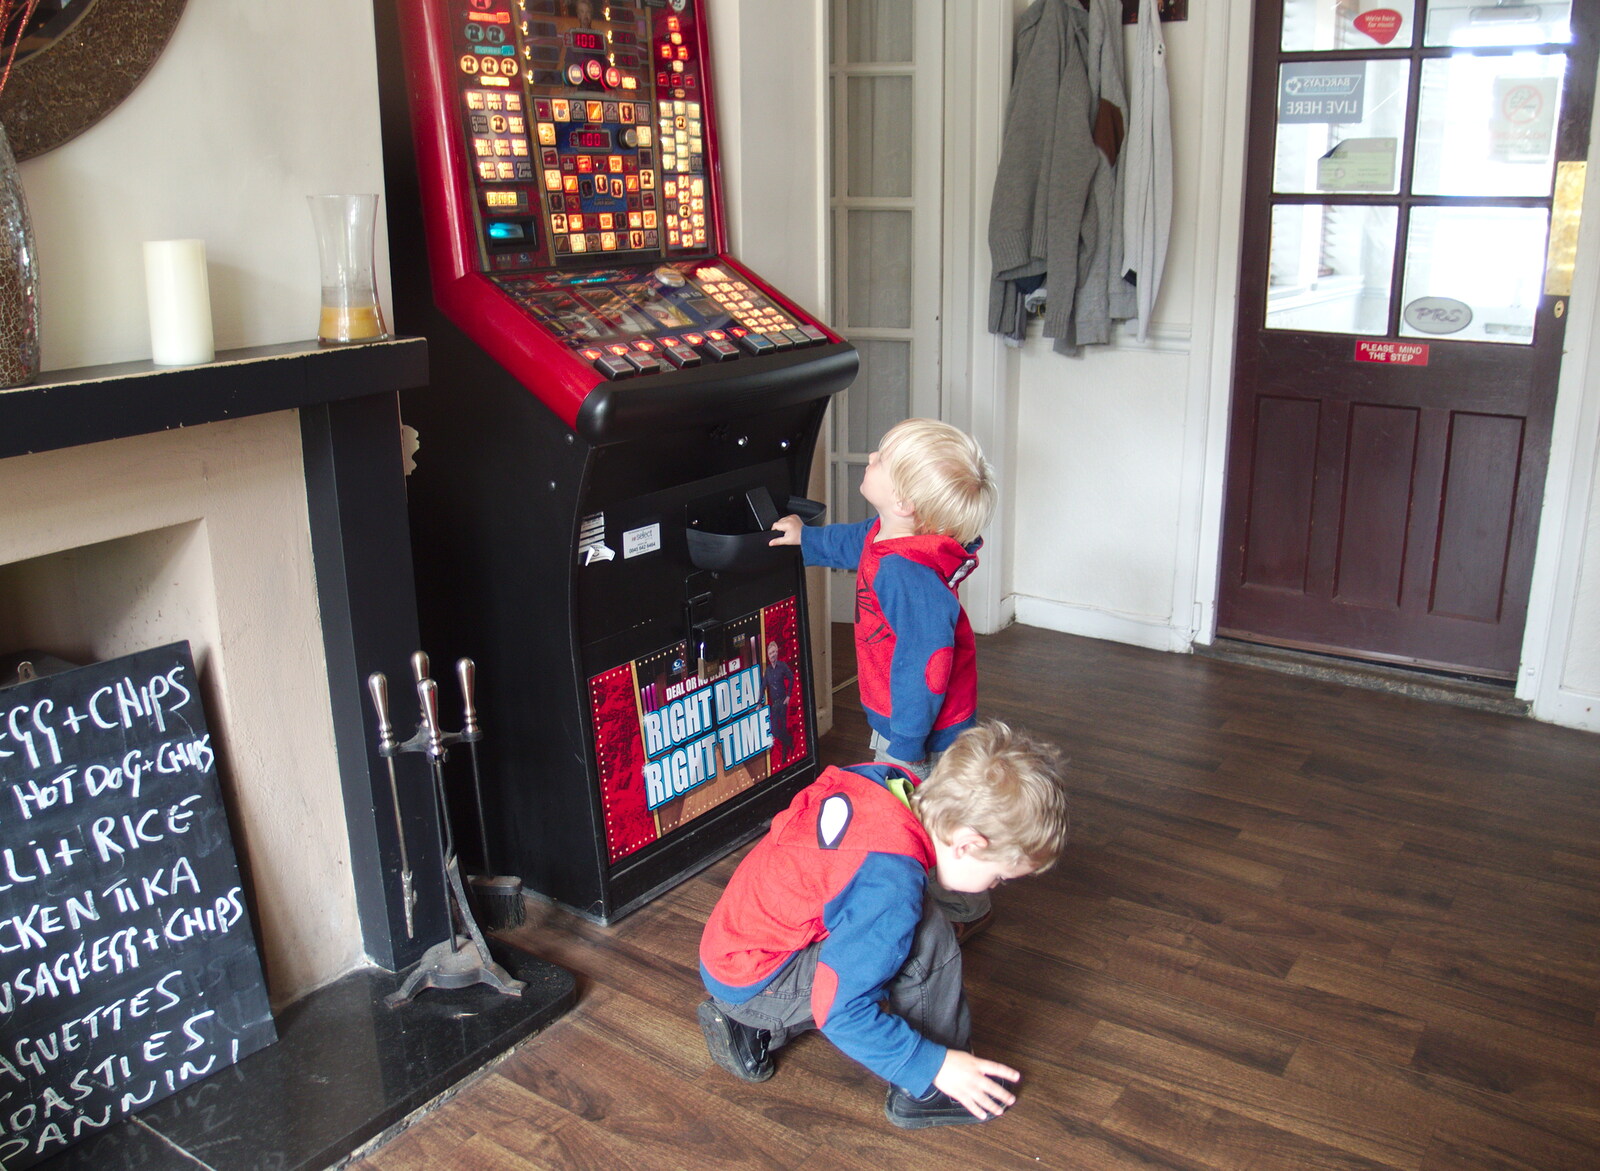 Harry pokes a fruit machine from A Return to Bedford: the BSCC Annual Weekend Away, Shefford, Bedfordshire - 10th May 2014